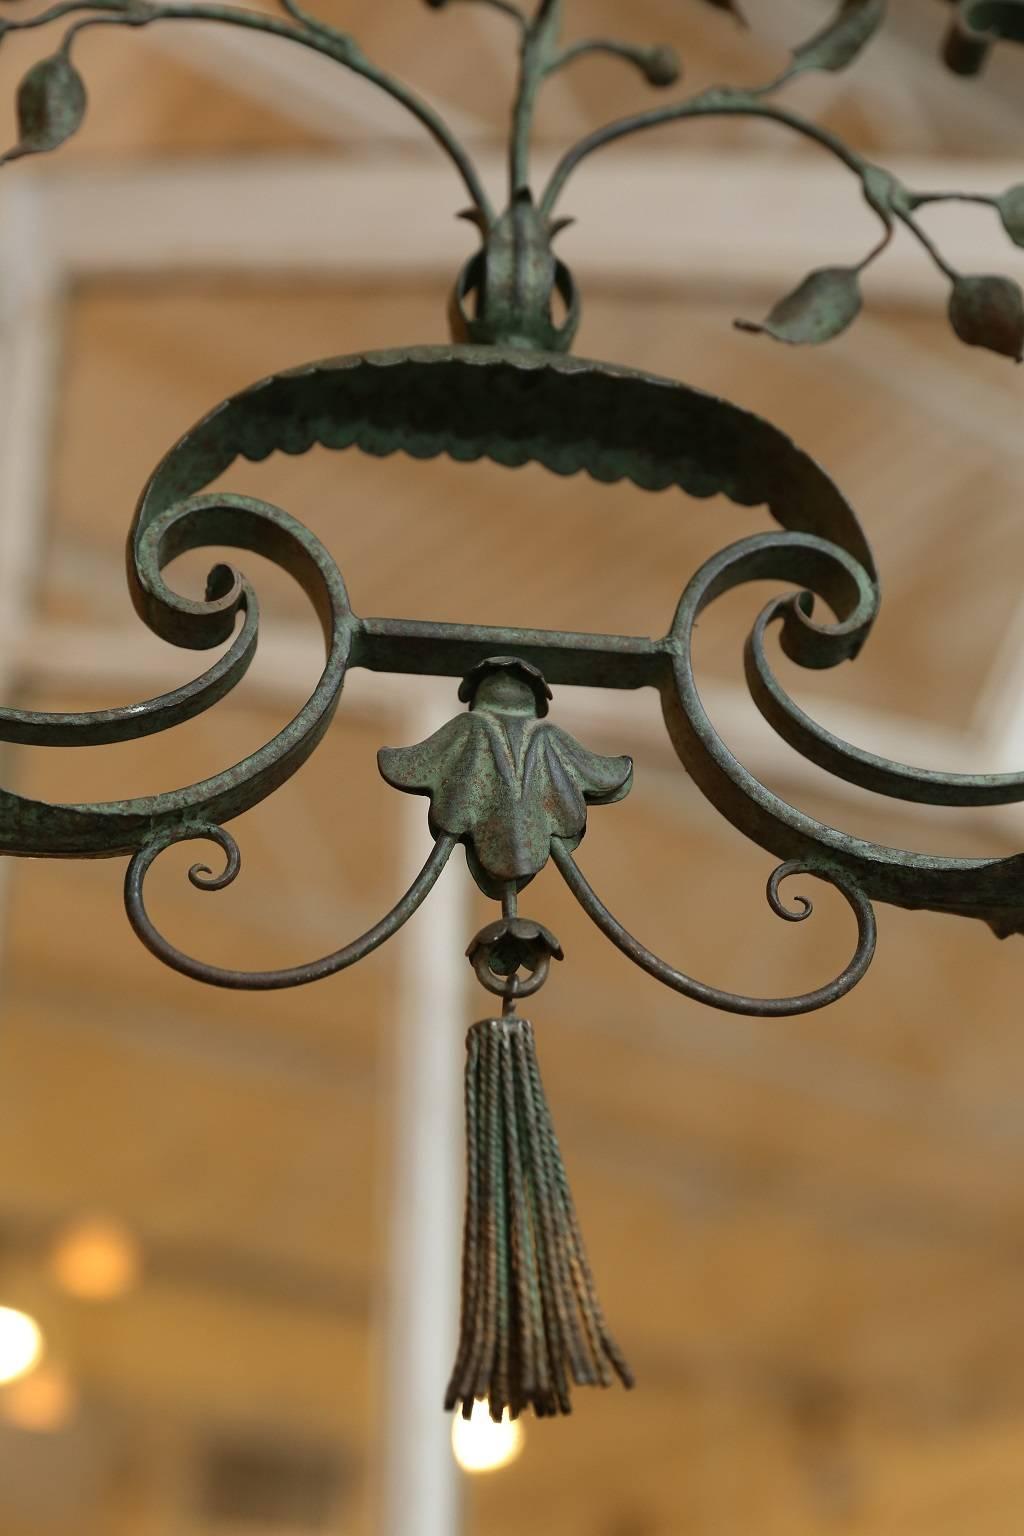 An exceptional French wrought iron chandelier in its original green painted finish, that acquired a desirable patina over years. Newly wired for candelabra size bulbs, this chandelier features four beautifully scrolled arms supporting scalloped-edge